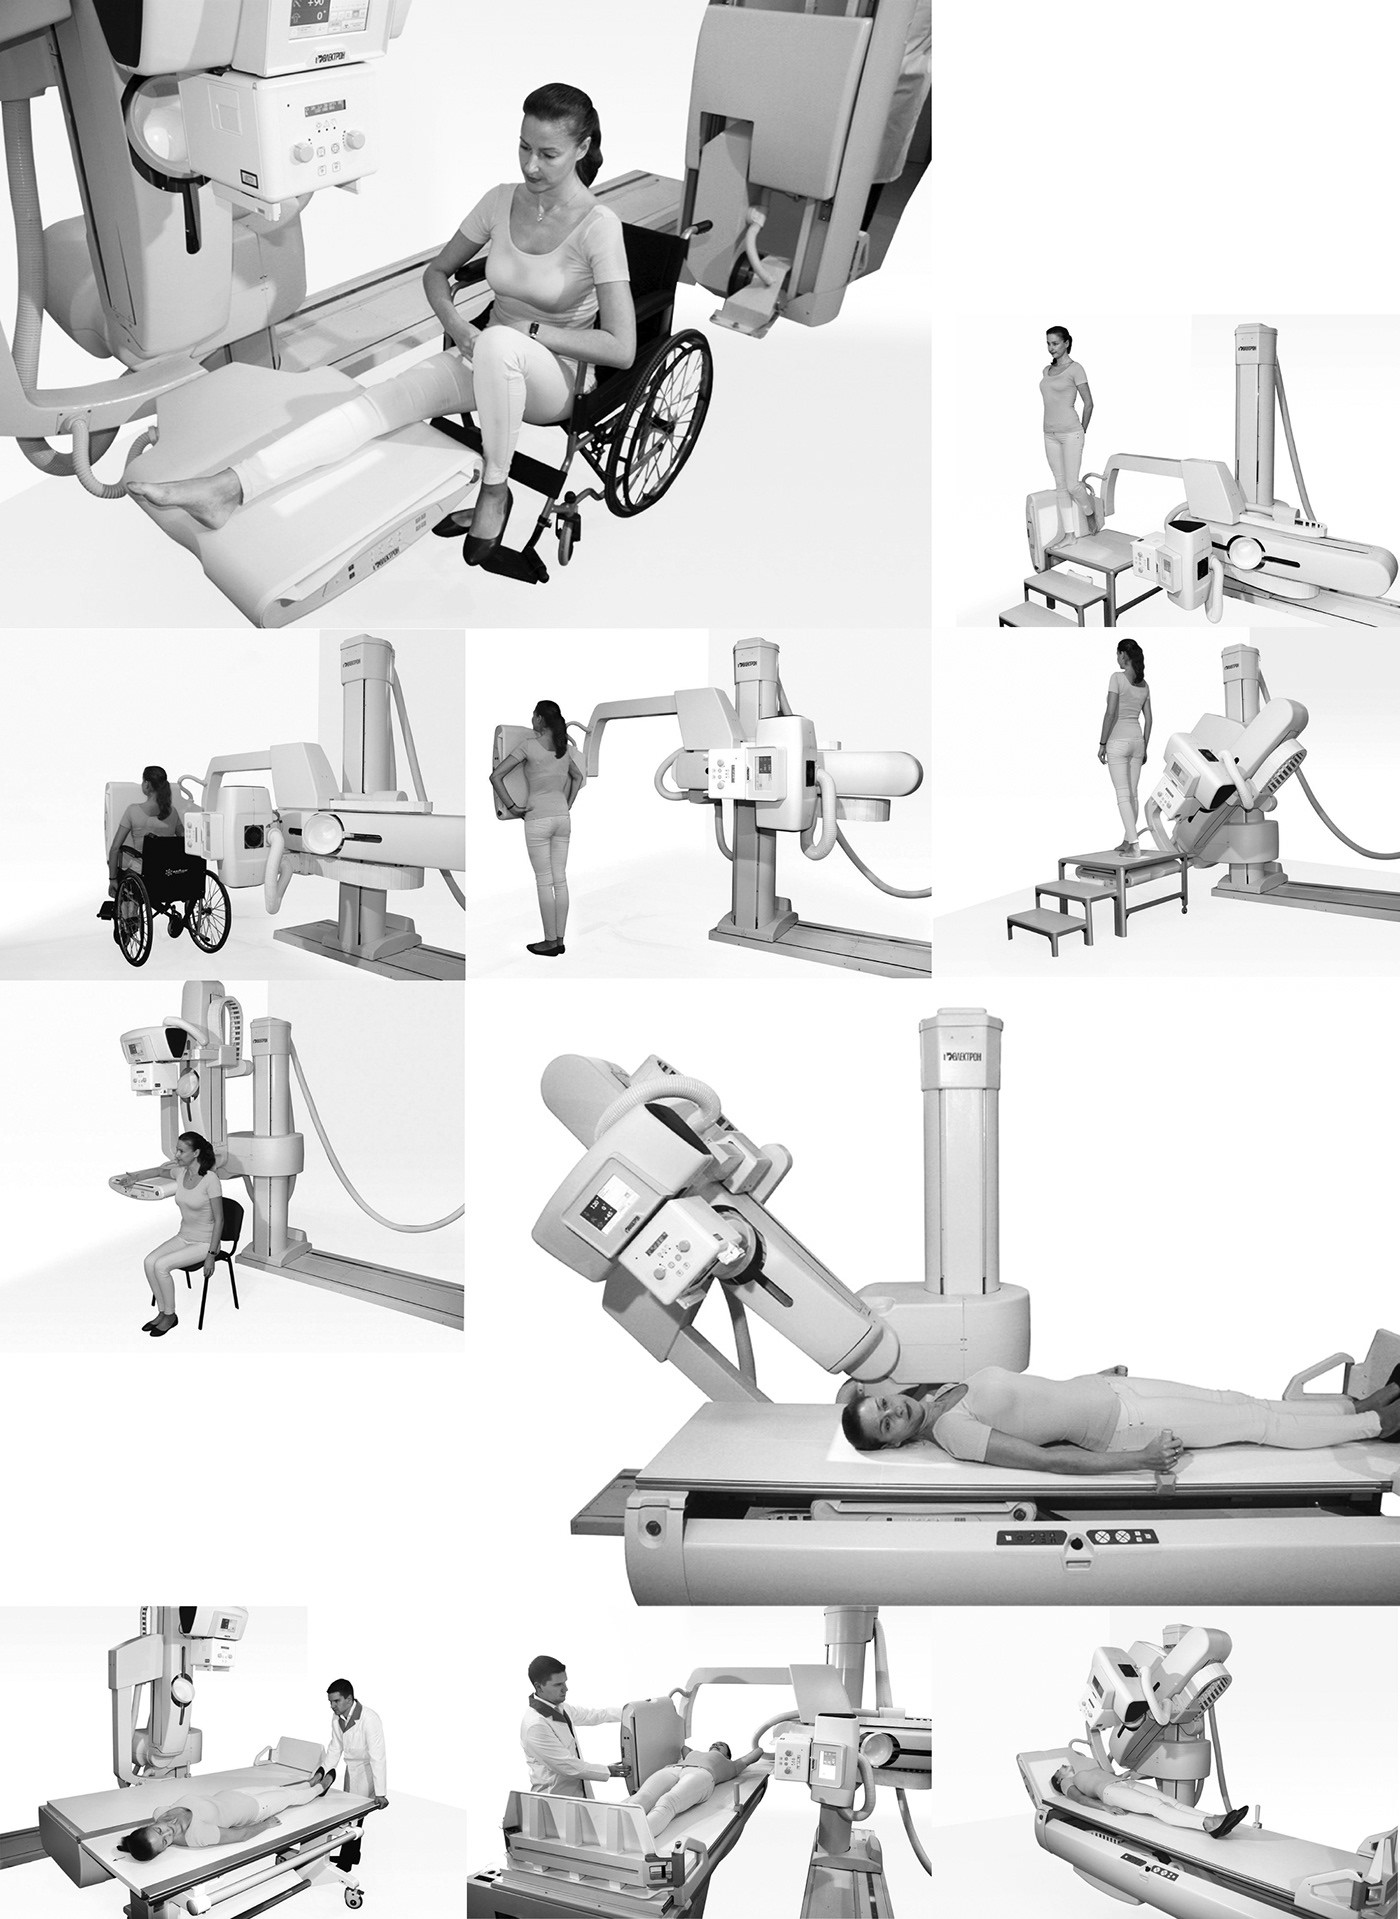 medical equipment x-ray system radiography equipment surgical tools surgical equipment Diagnostic System design for disabled laboratory user friendly design user friendly